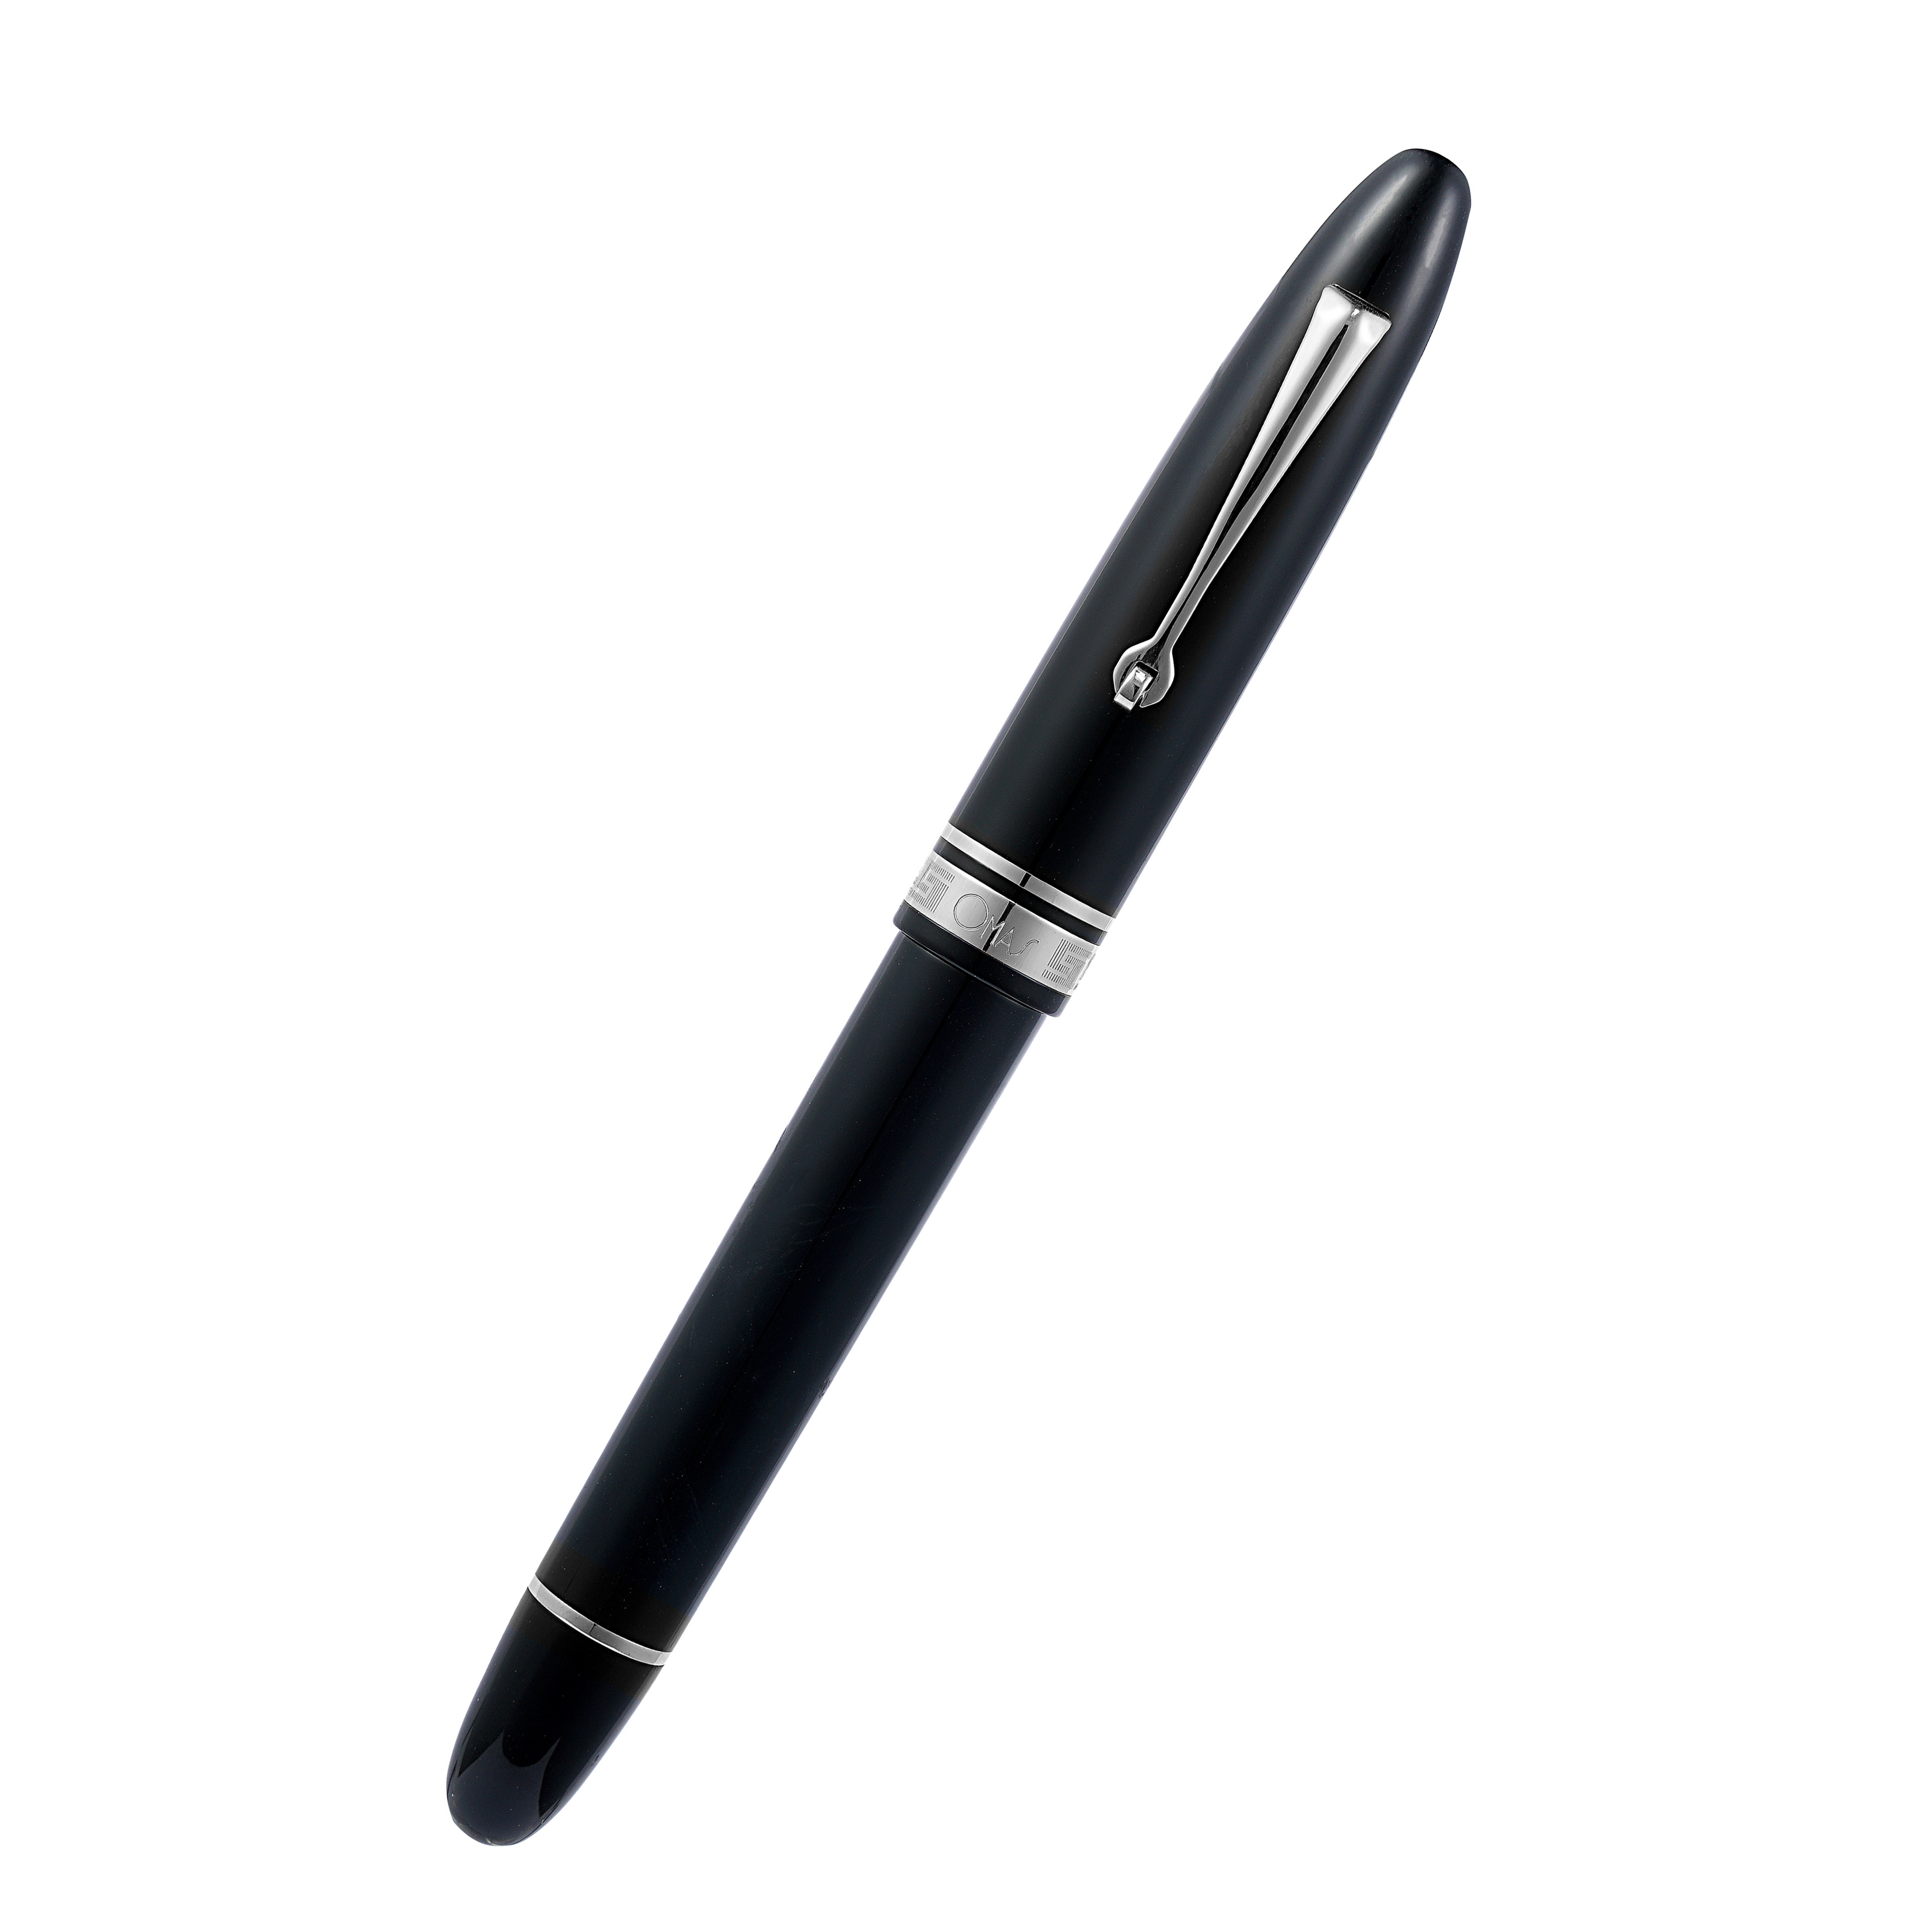 Omas Ogiva Fountain Pen in Nera with Silver Trim